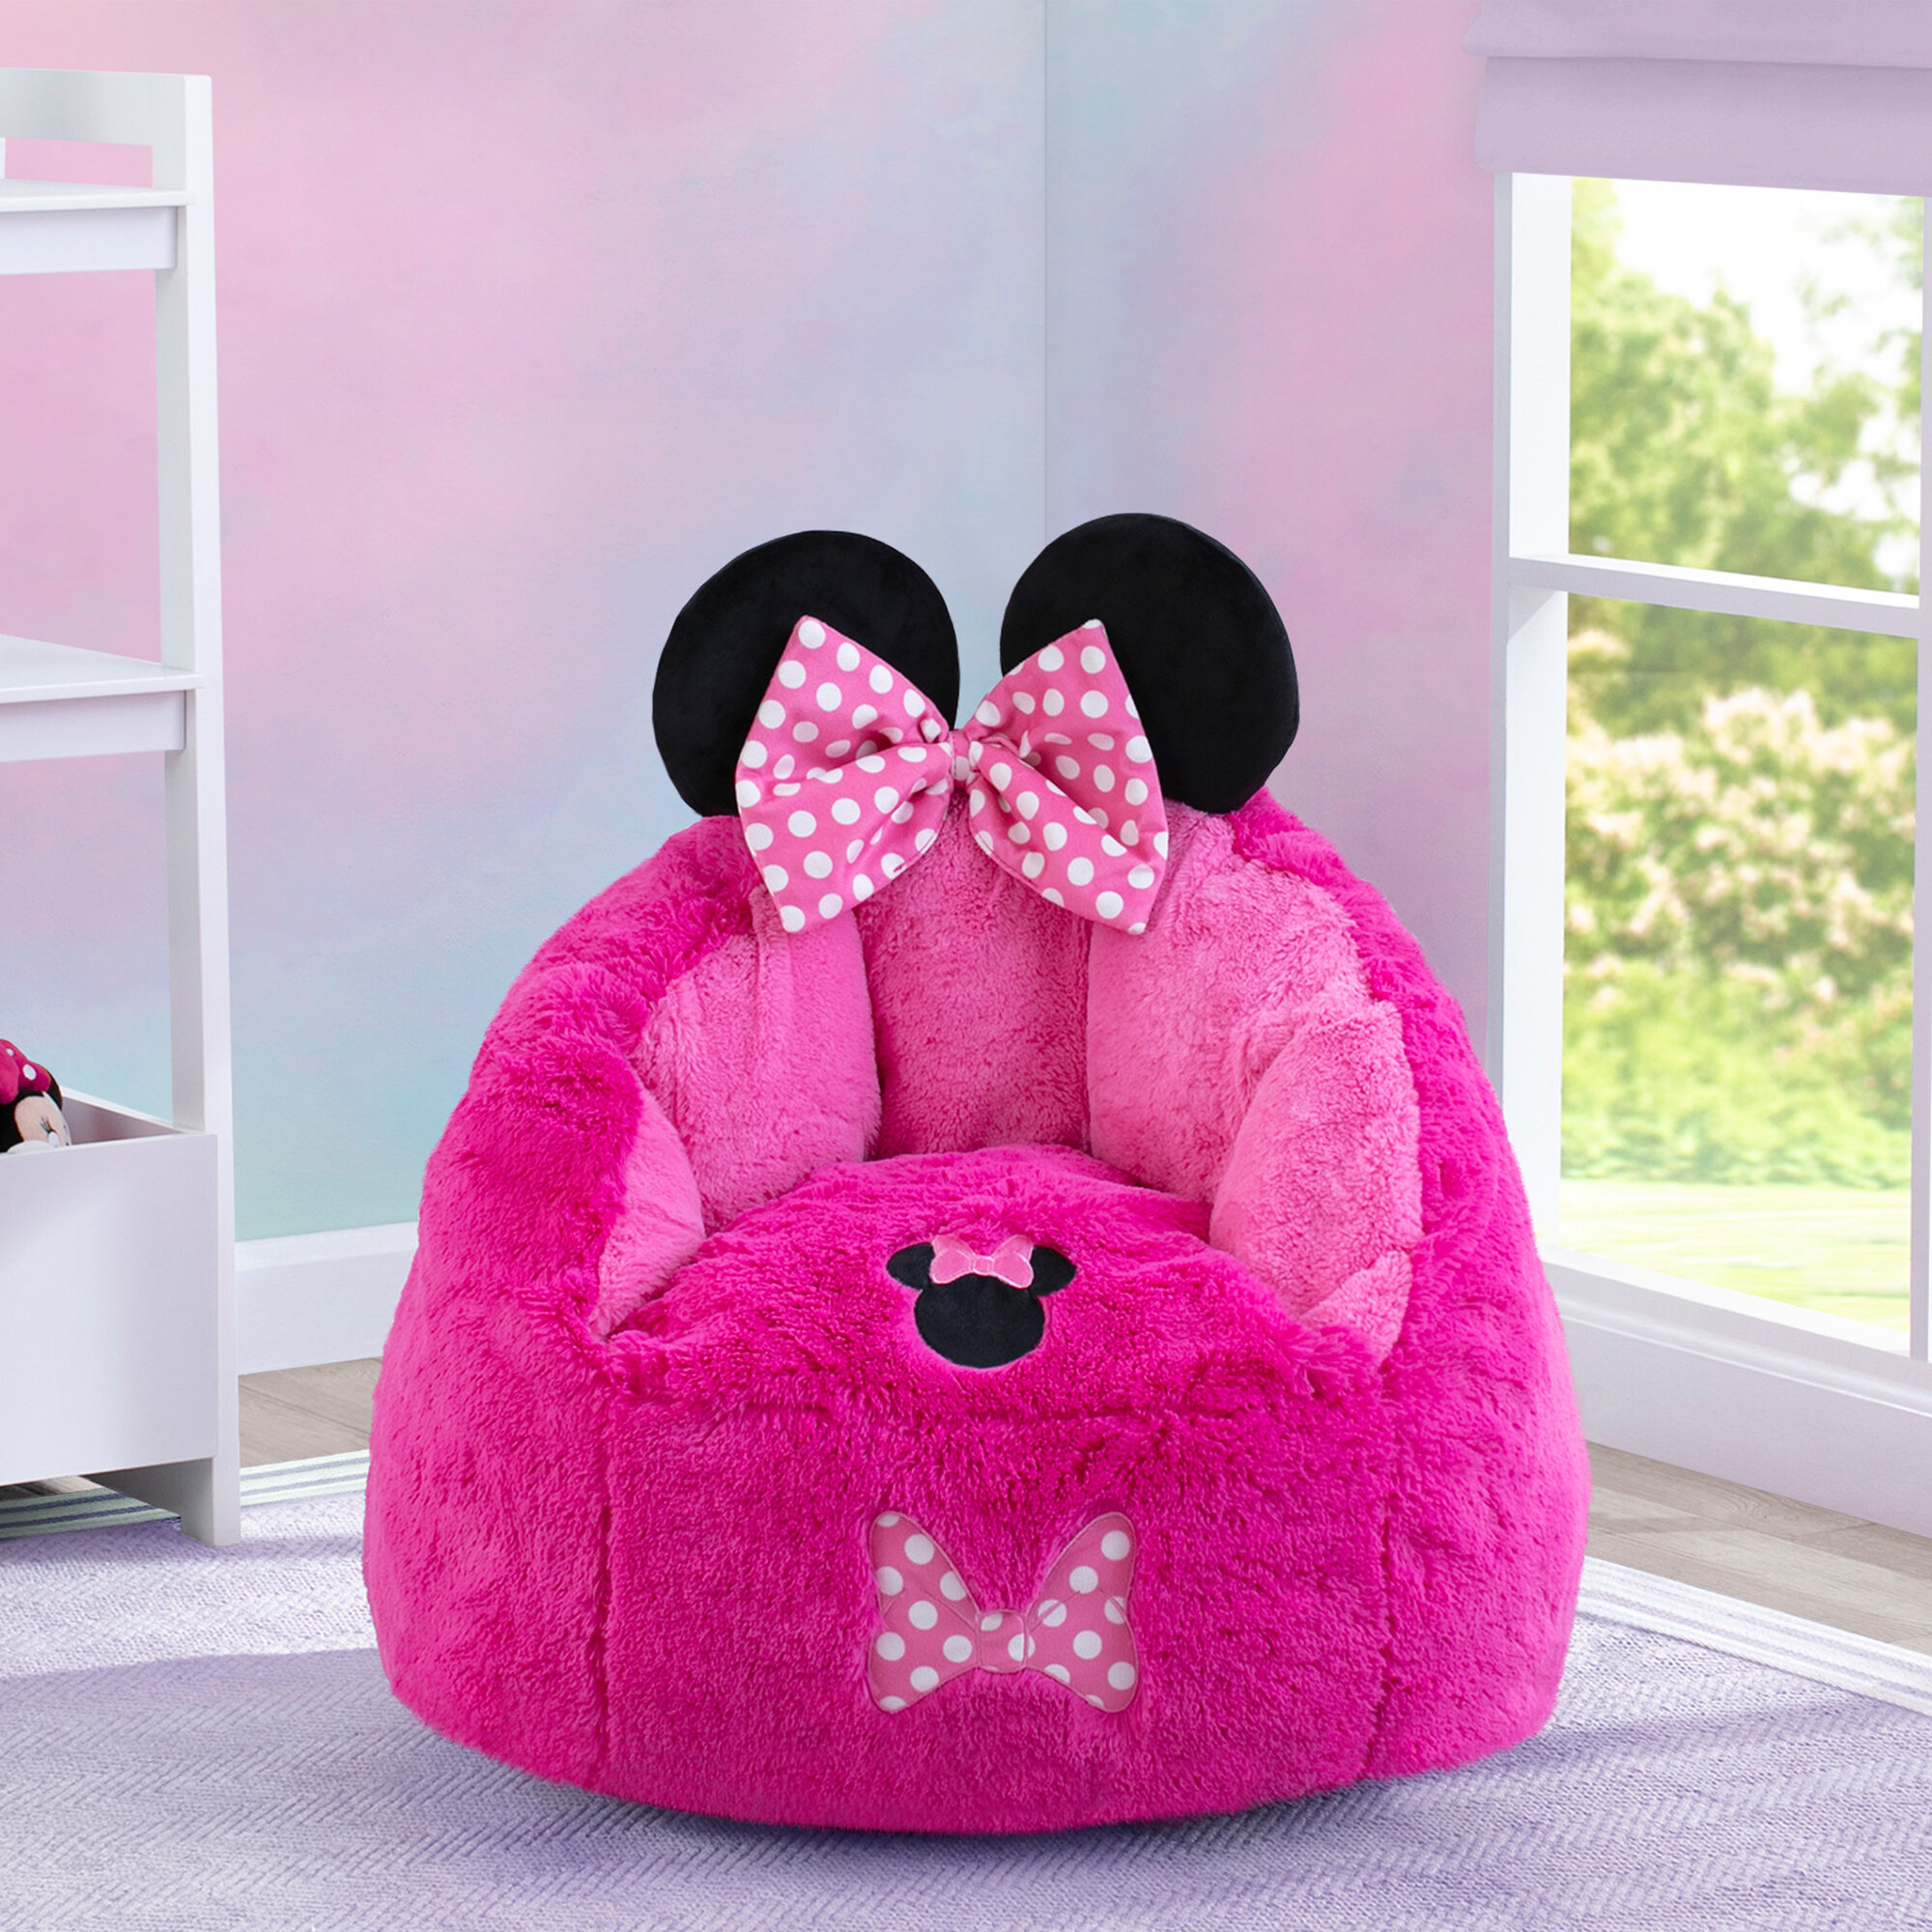 Minnie Mouse Upholstered Chair